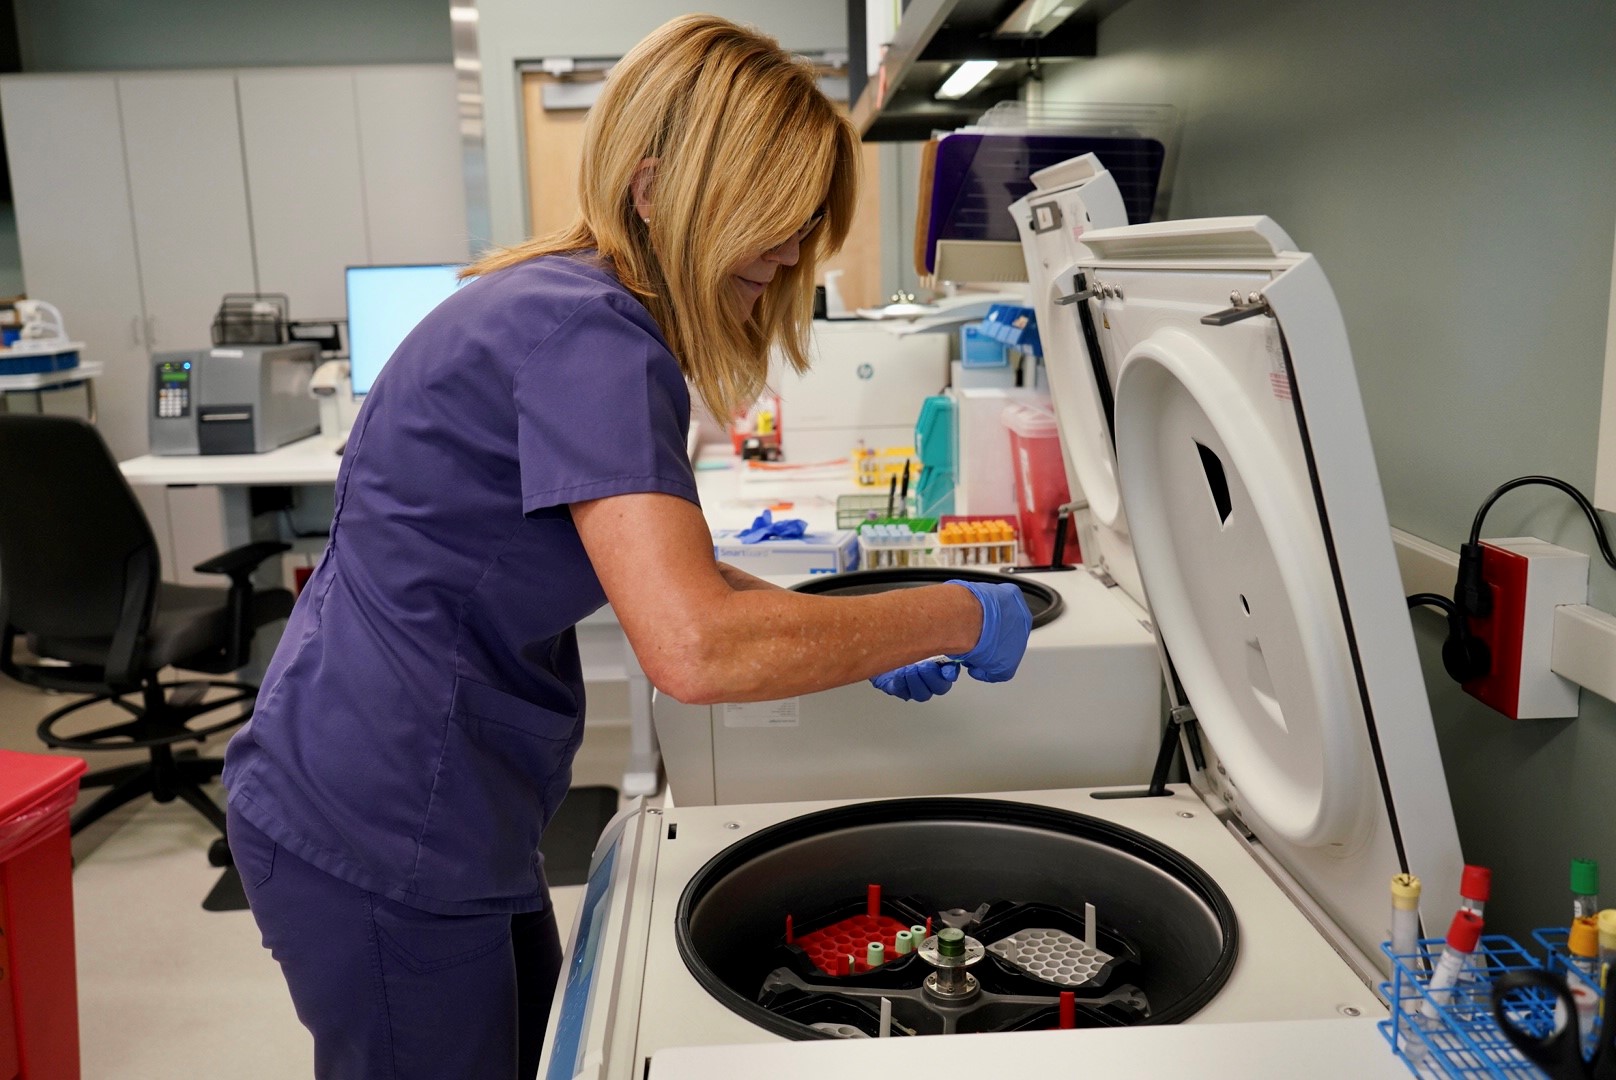 A Caucasian woman in purple scrubs removes a blood sample from a large cyclotron in a hospital laboratory.